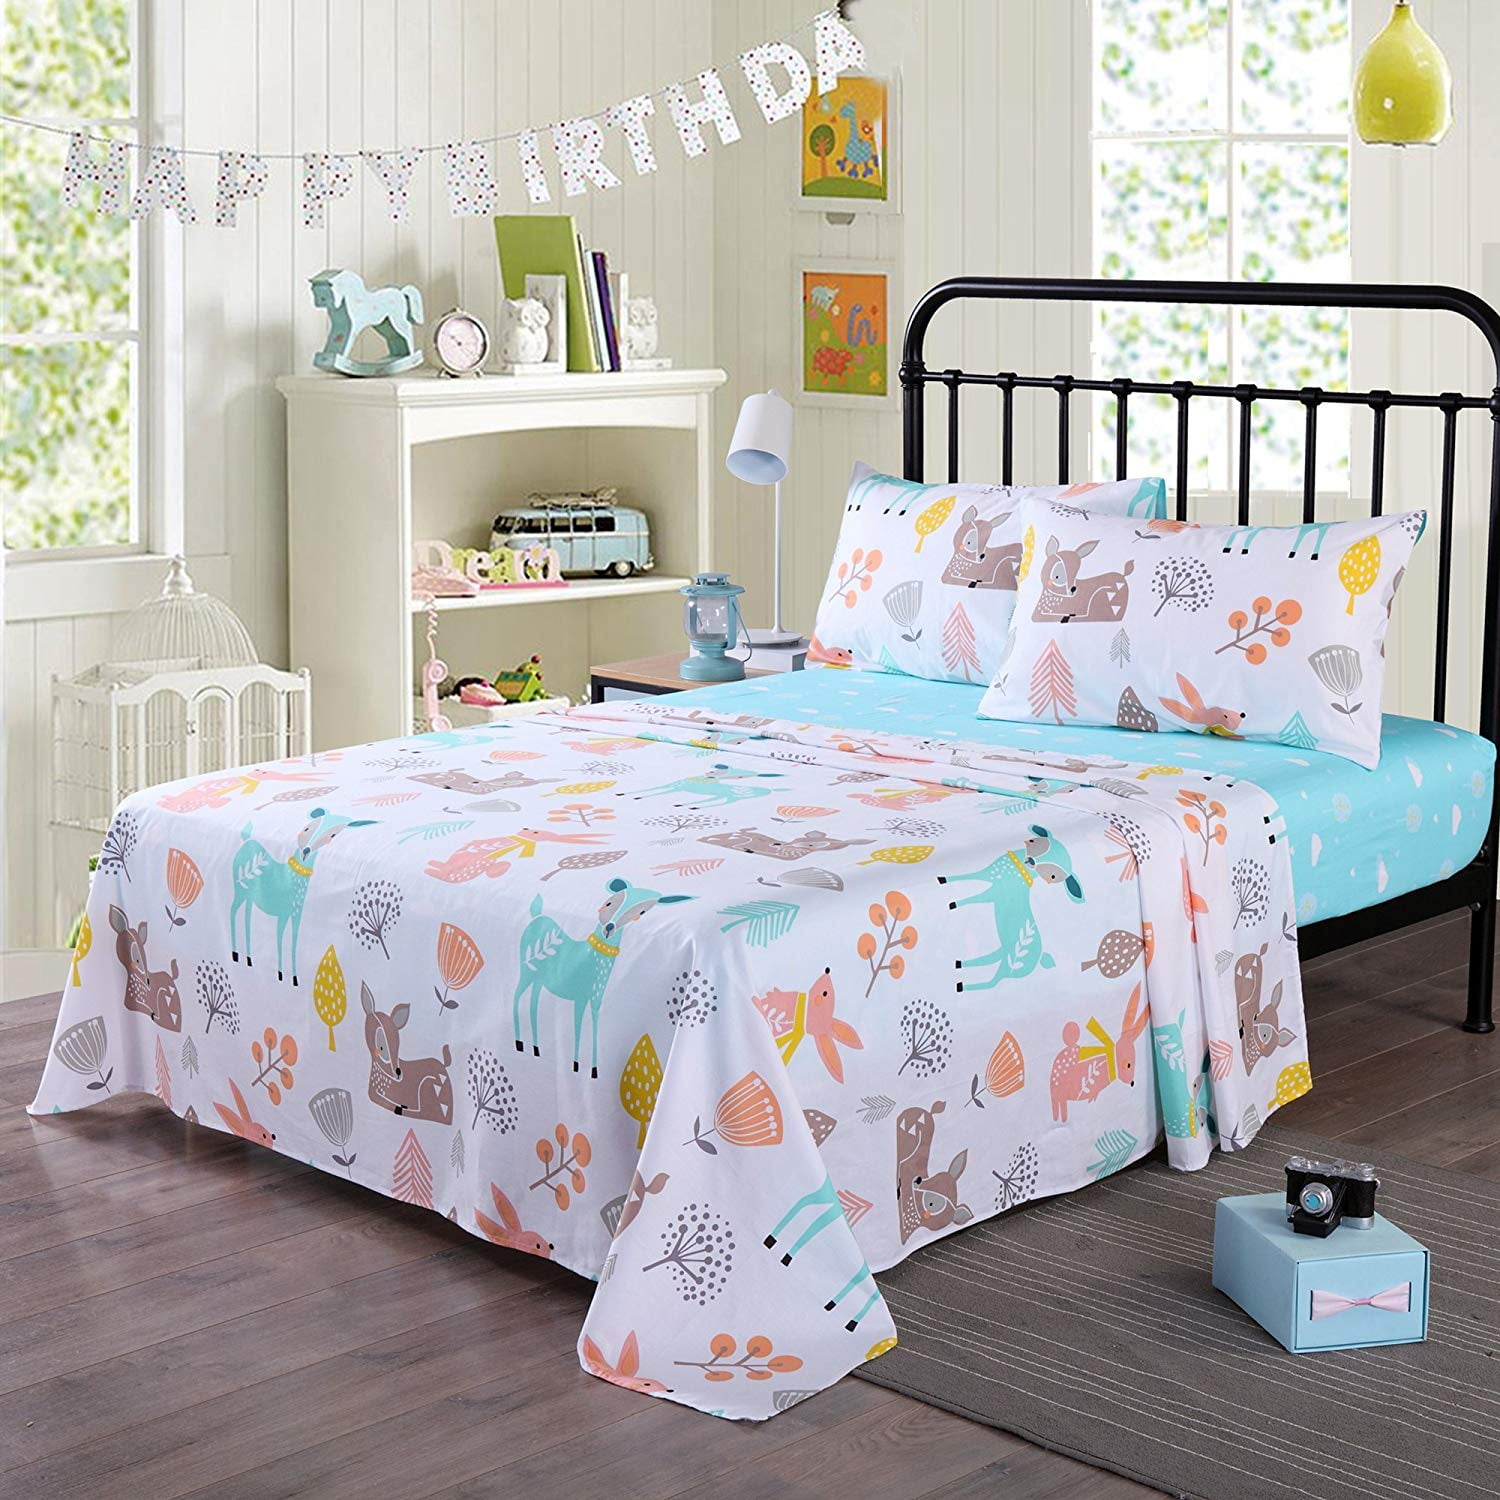 Yasida Twin Bed Sheets Kids, Twin Sheets 2 Pack for Kids, Fitted Sheet  Twin, Airplane Printed Bed Sheets for Girls or Boys, Bed Fitted Sheet and